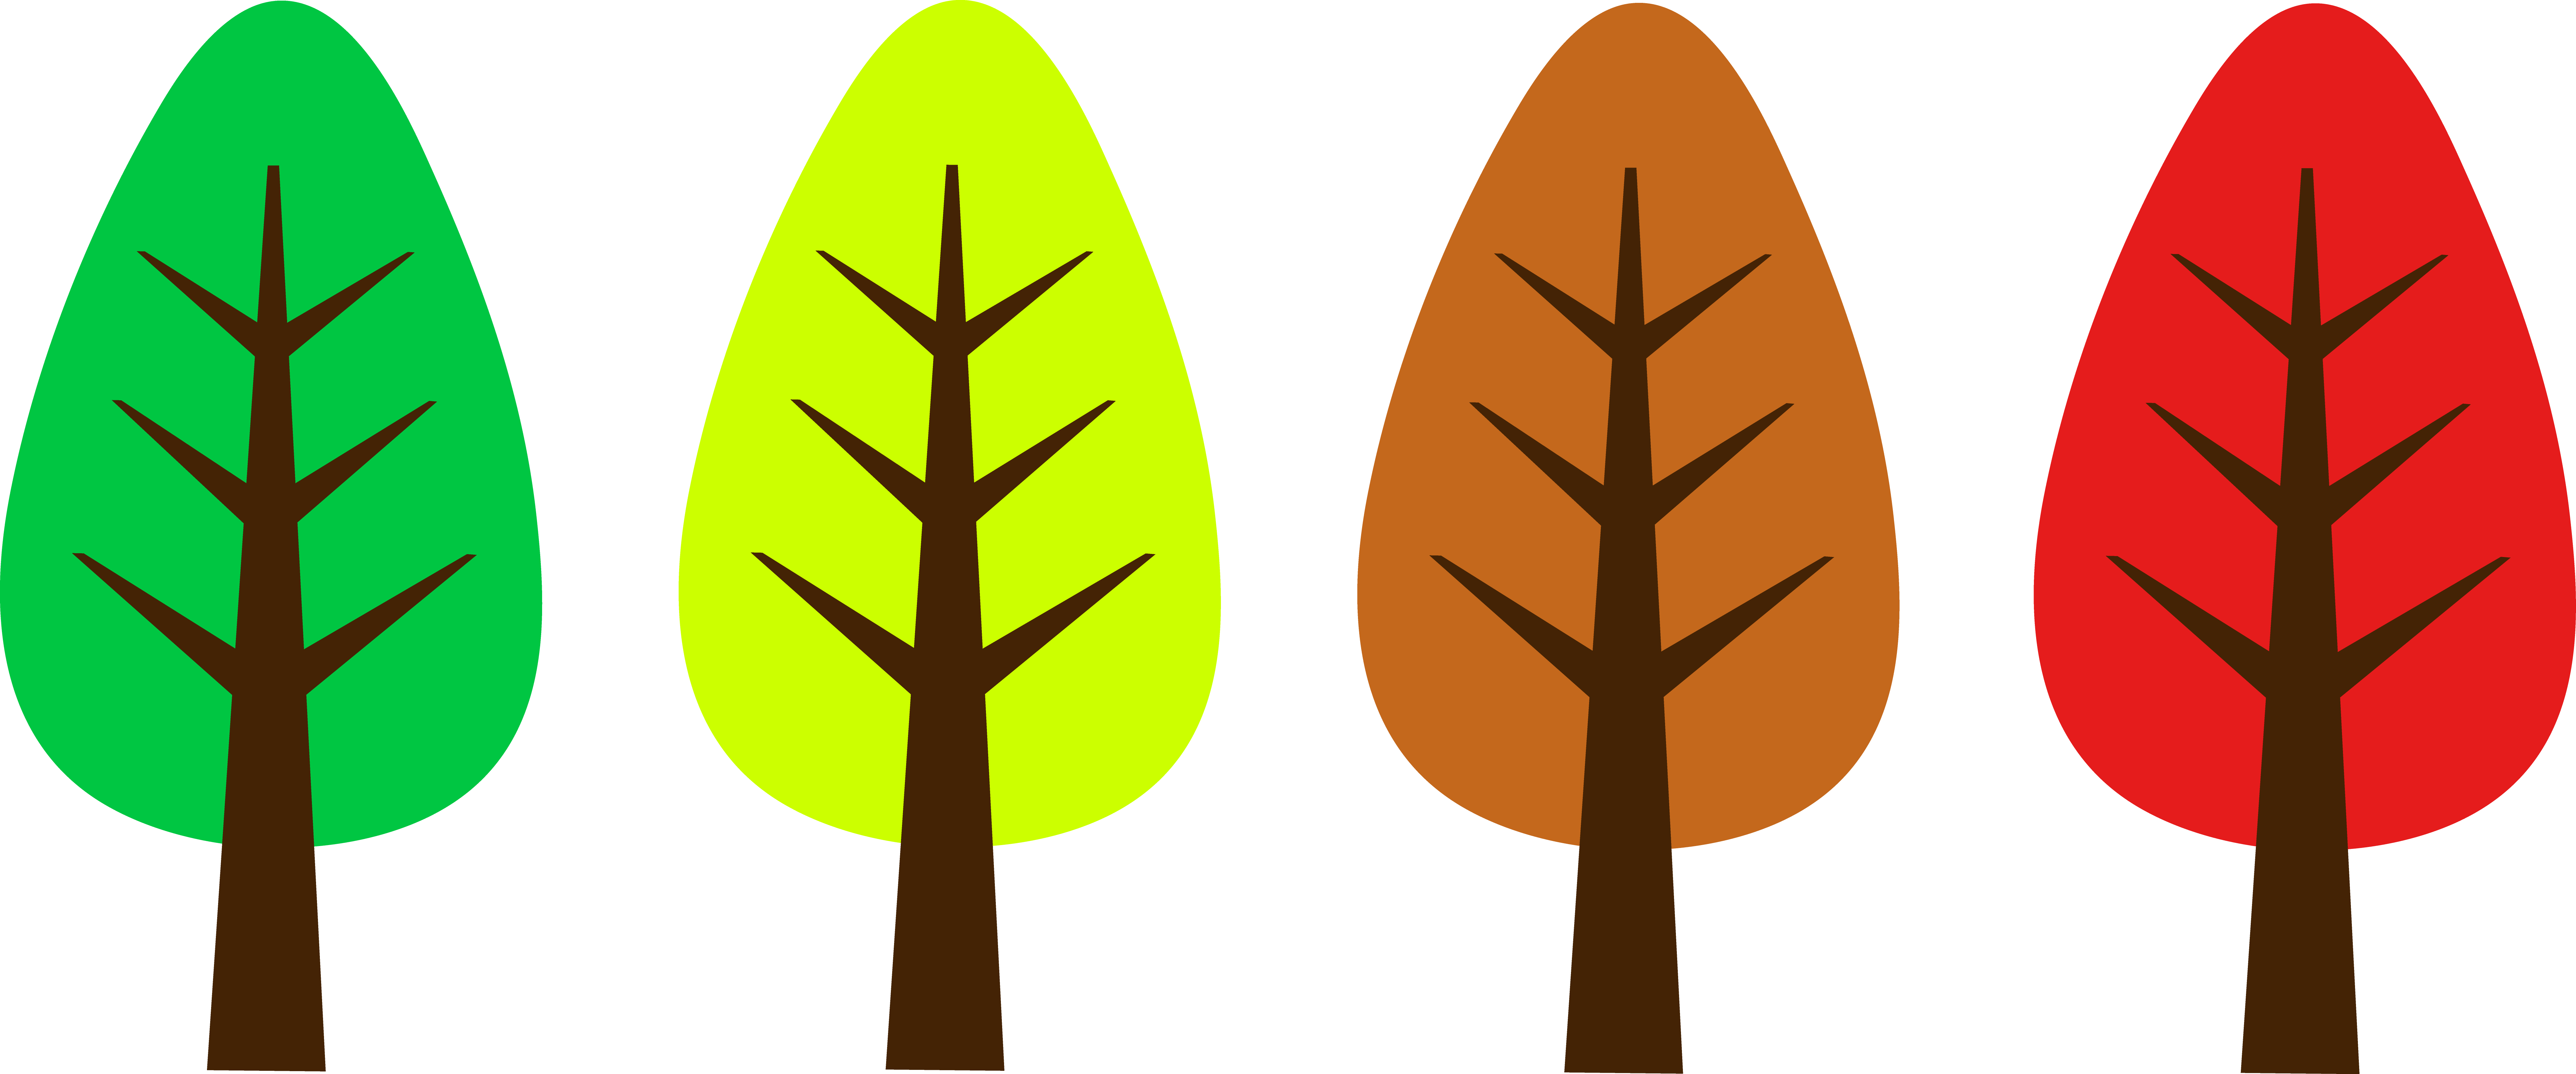 Free Simple Plant Cliparts, Download Free Clip Art, Free